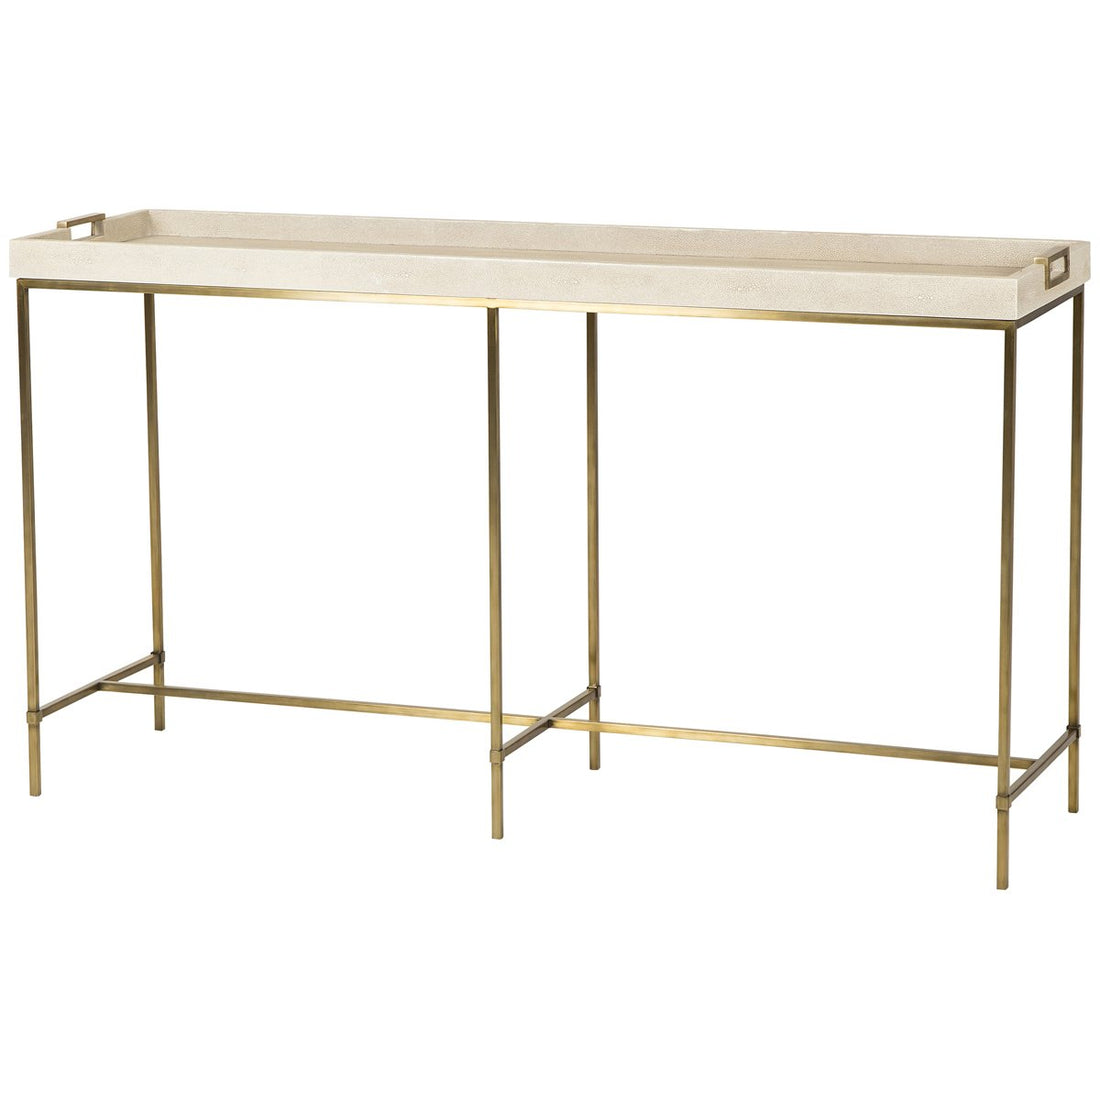 Sonder Living Lexi Tray Console Table